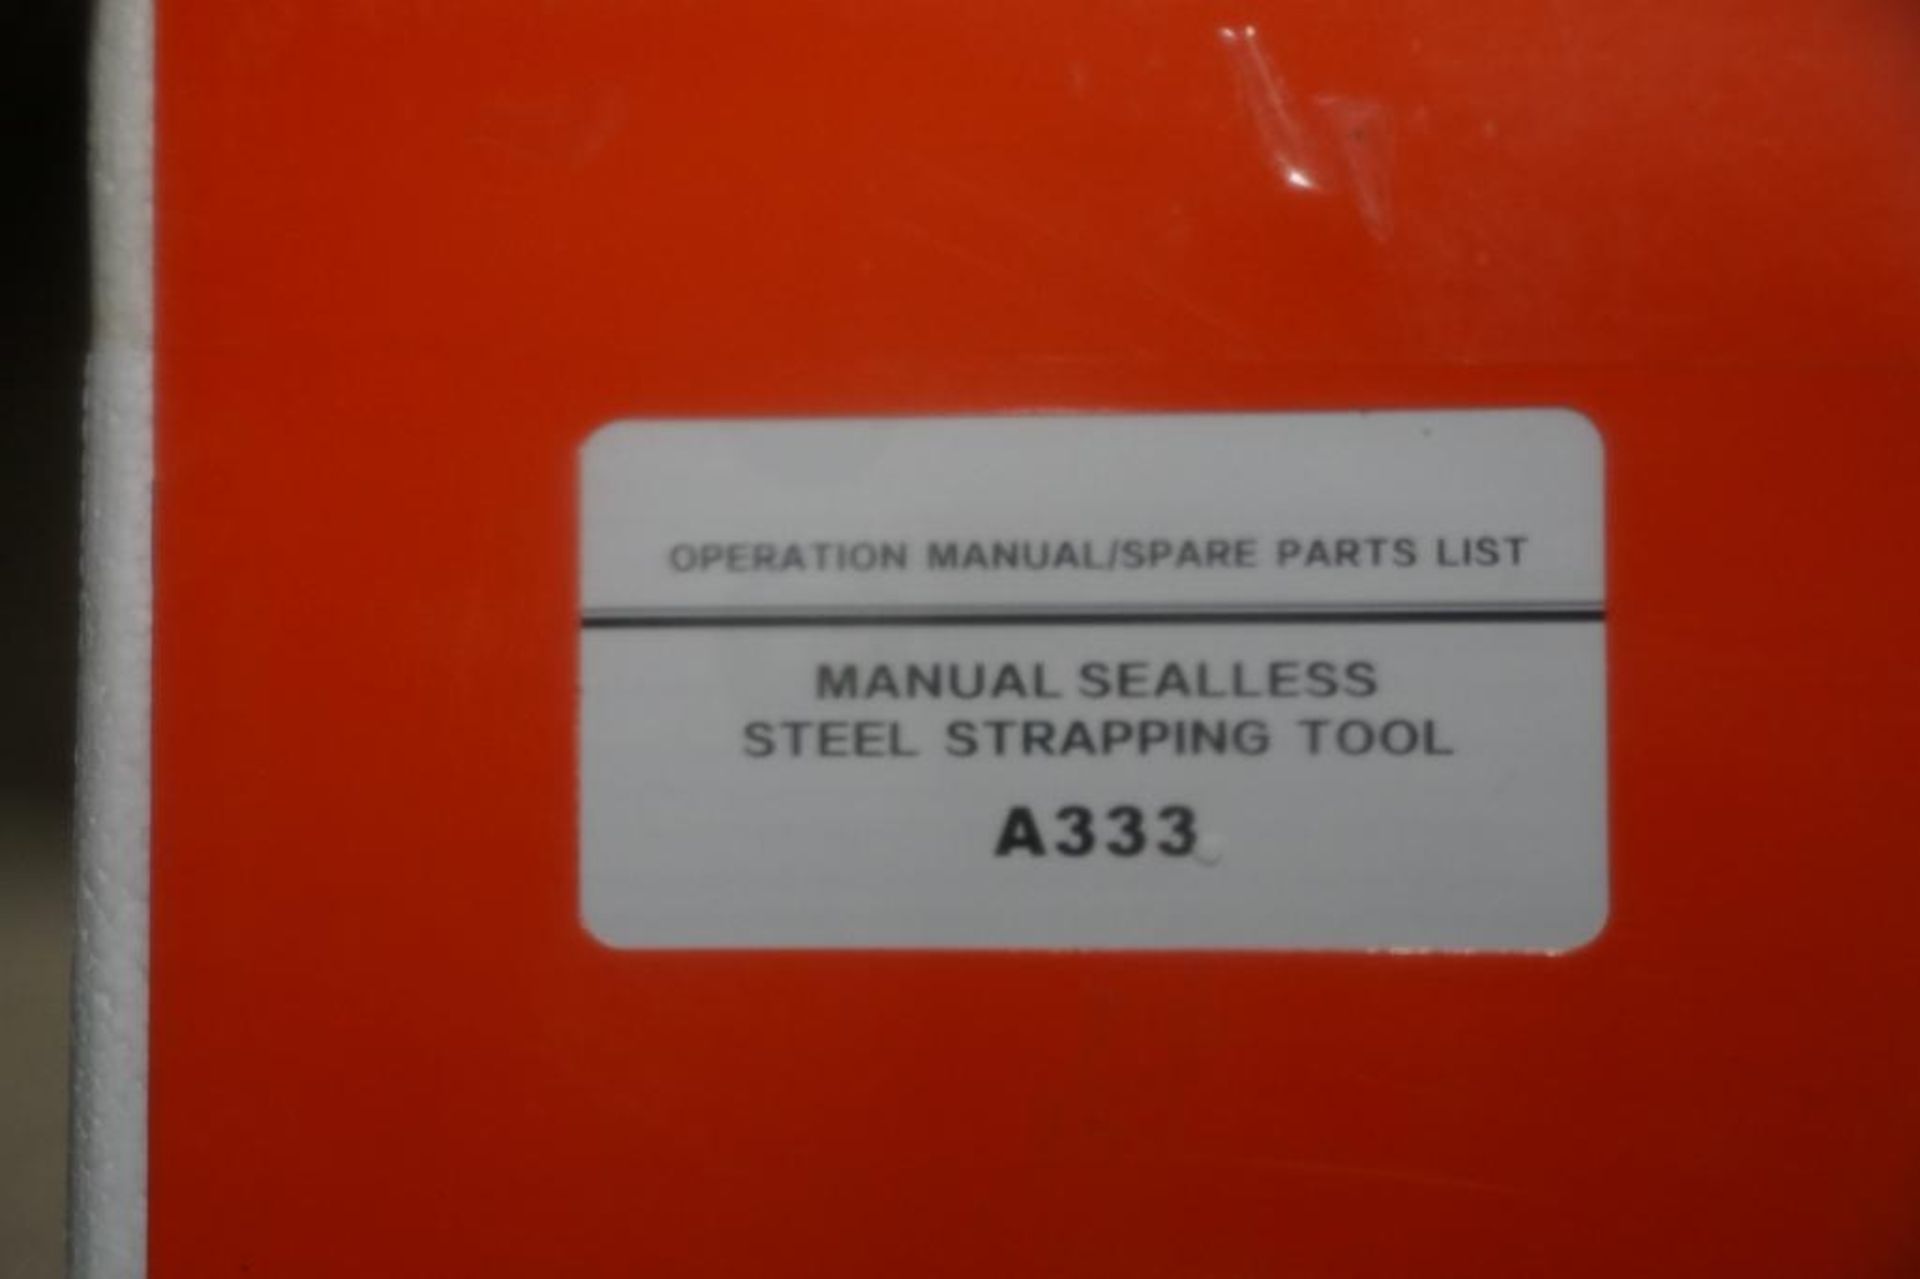 SDRTOP Manual Sealless Steel Strapping Tool - Image 5 of 5